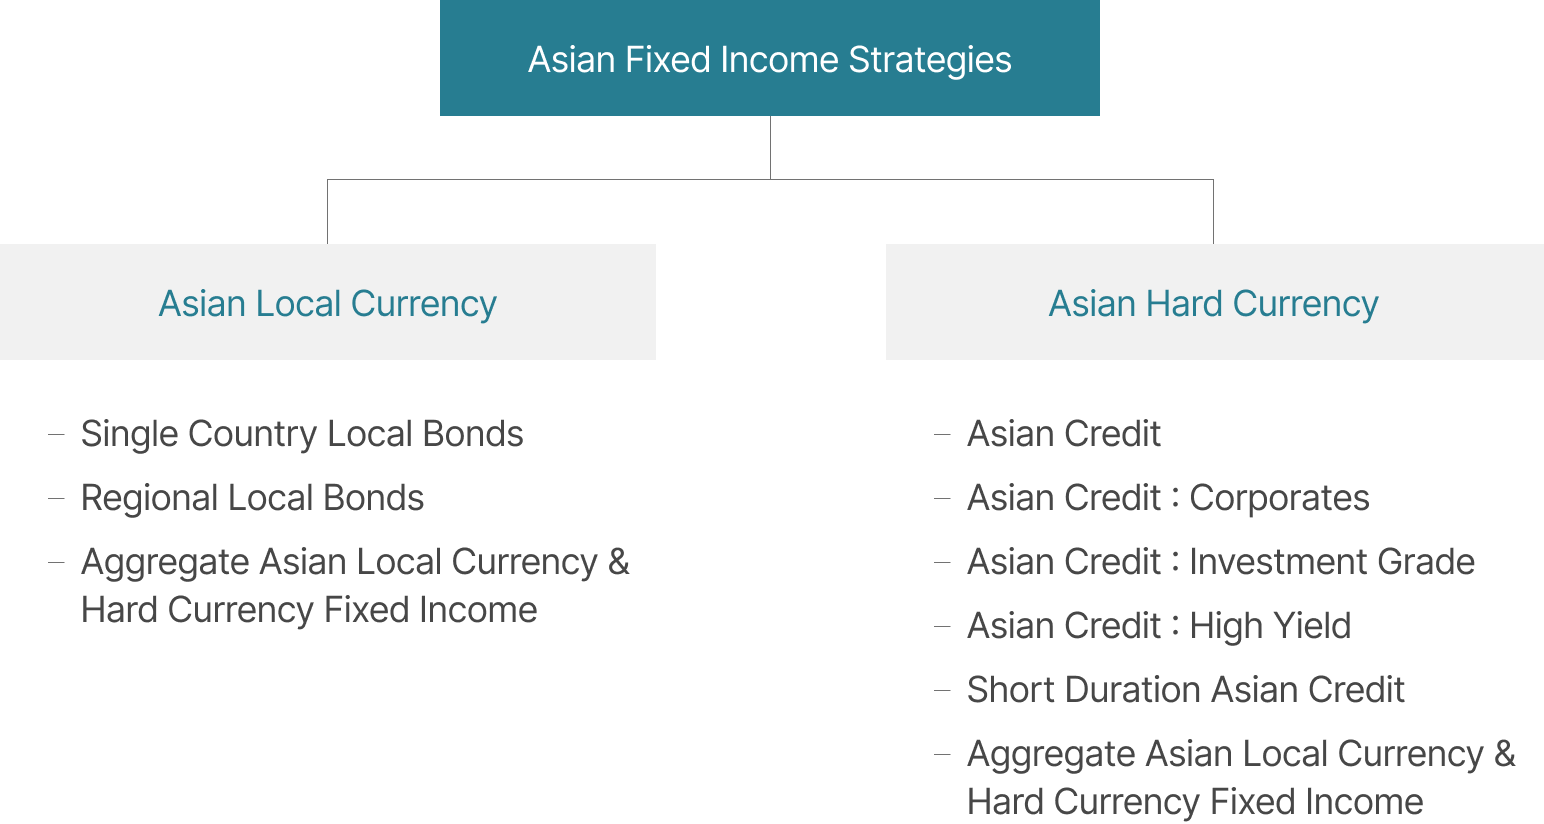 Specialists Across the Asian Fixed Income Market